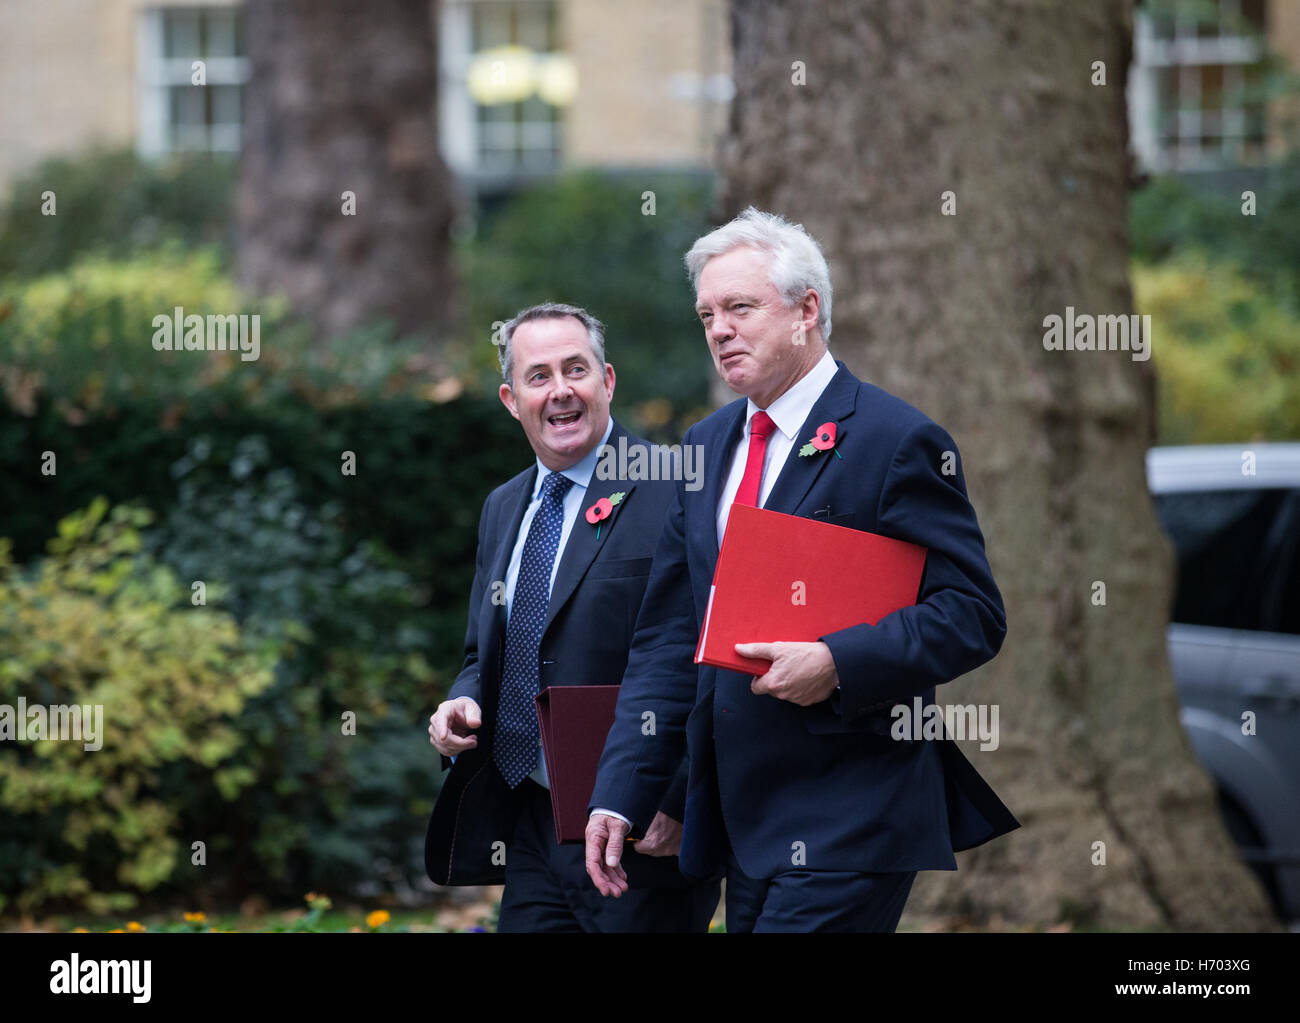 Secretary of State for International Trade ,Liam Fox and David Davis,Exit minister arrive for a Cabinet meeting Stock Photo